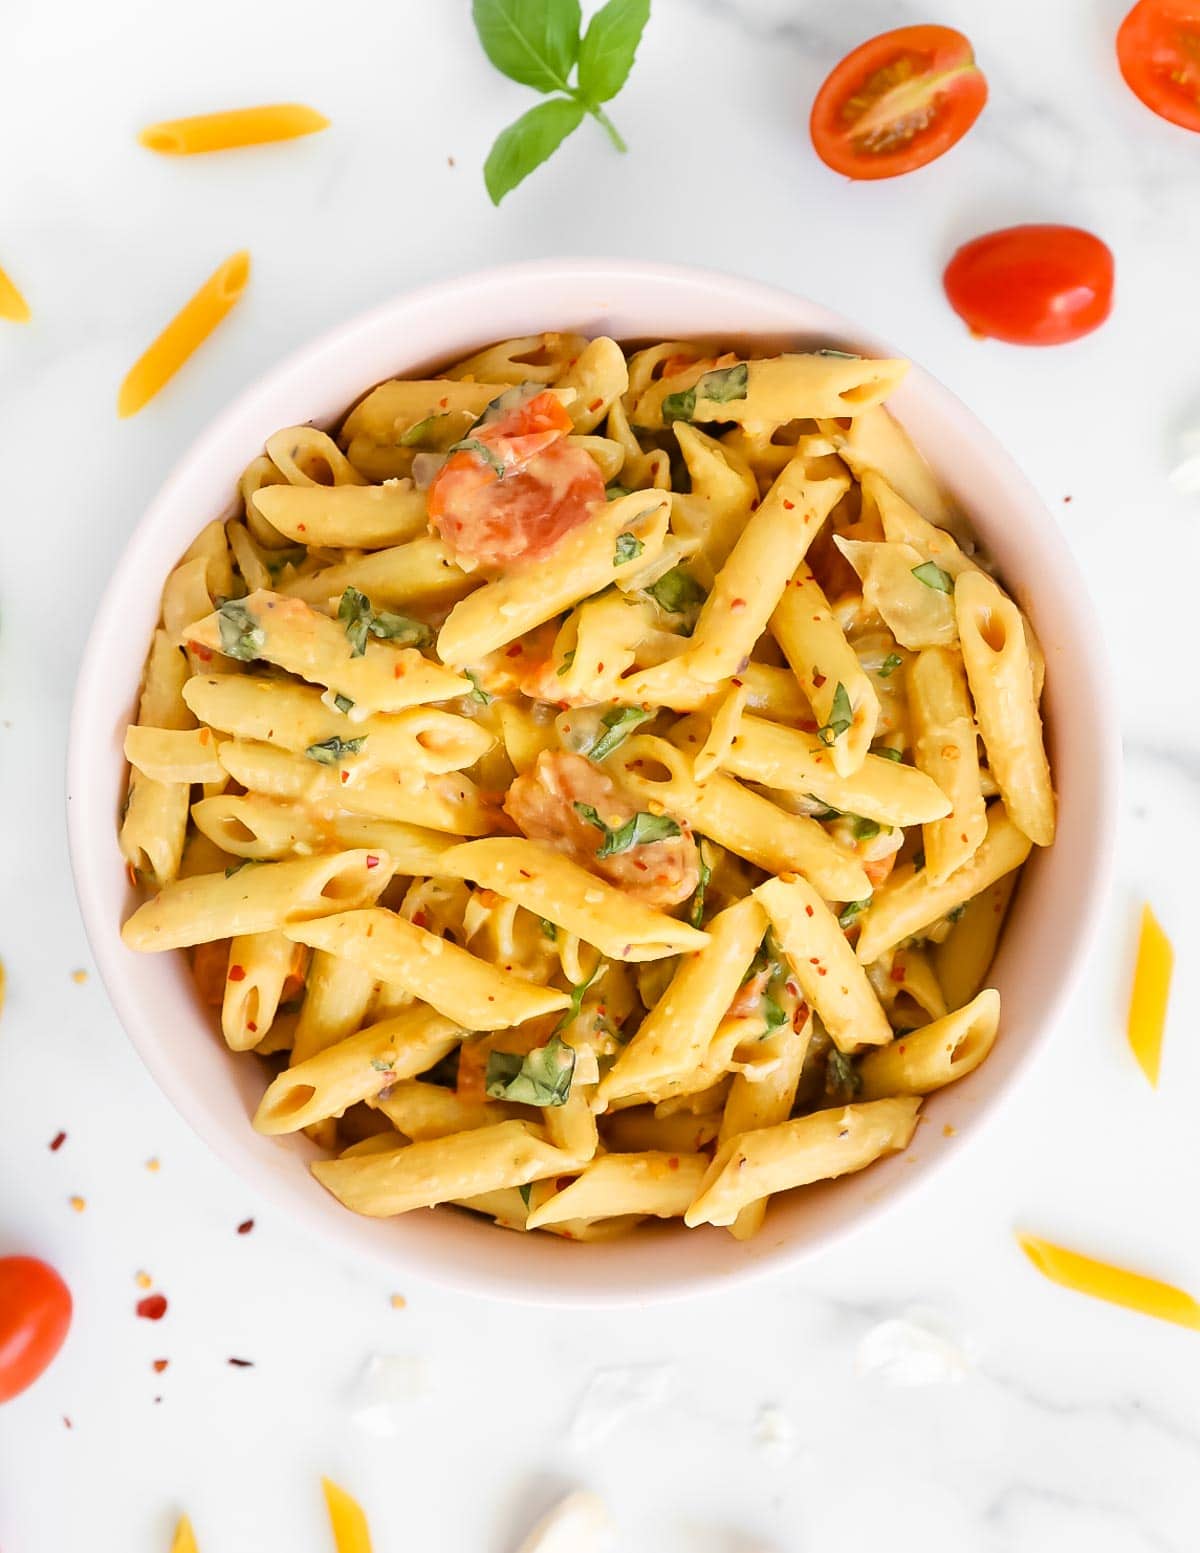 A pink bowl filled with penne pasta that is covered in a creamy sauce.